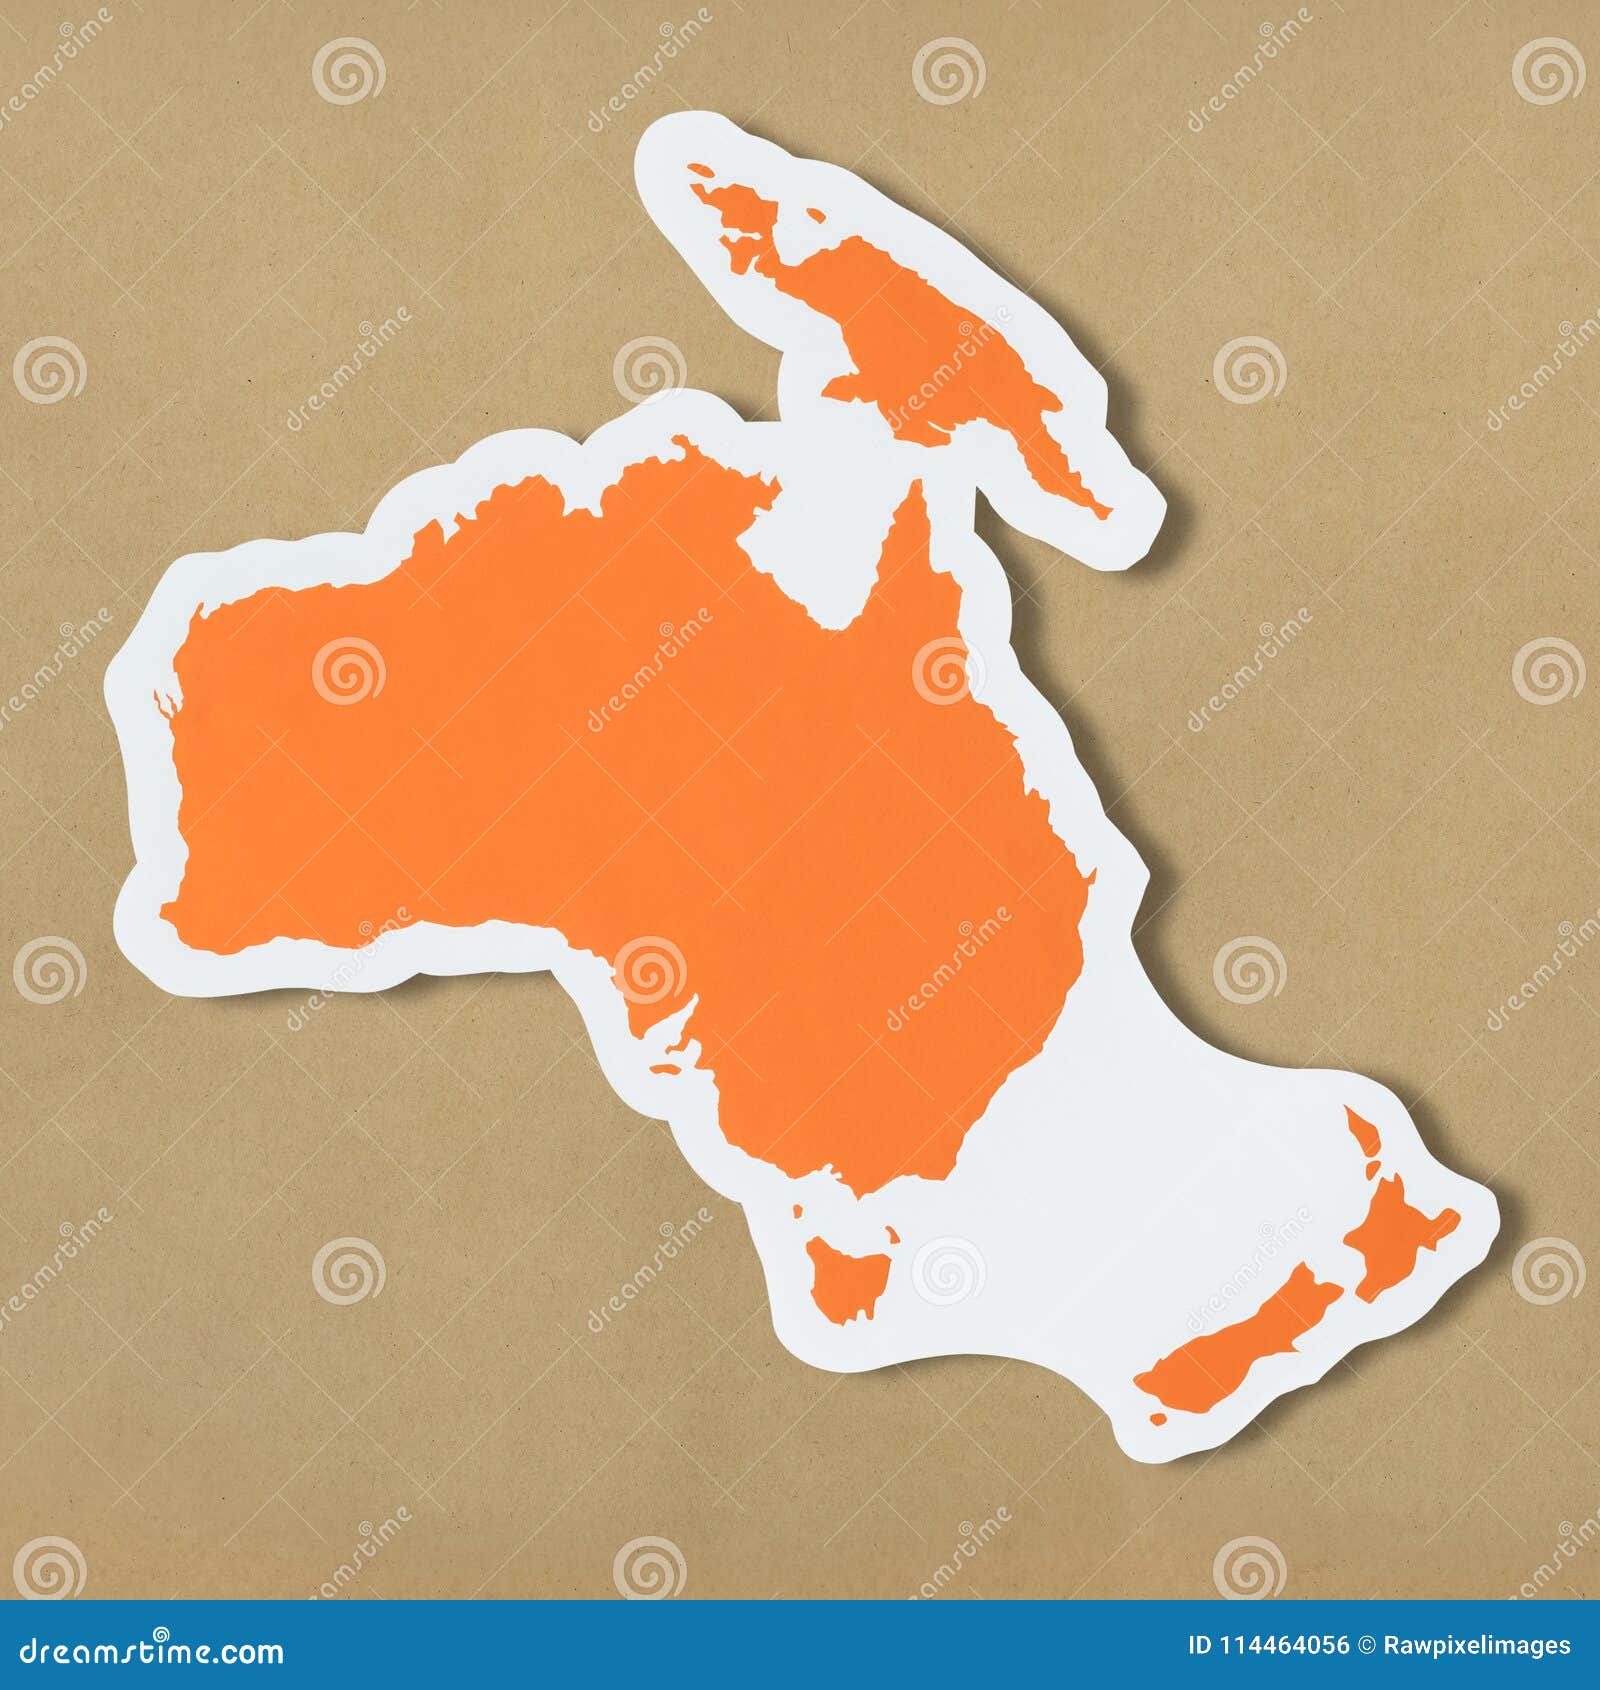 free blank map of australia and oceania